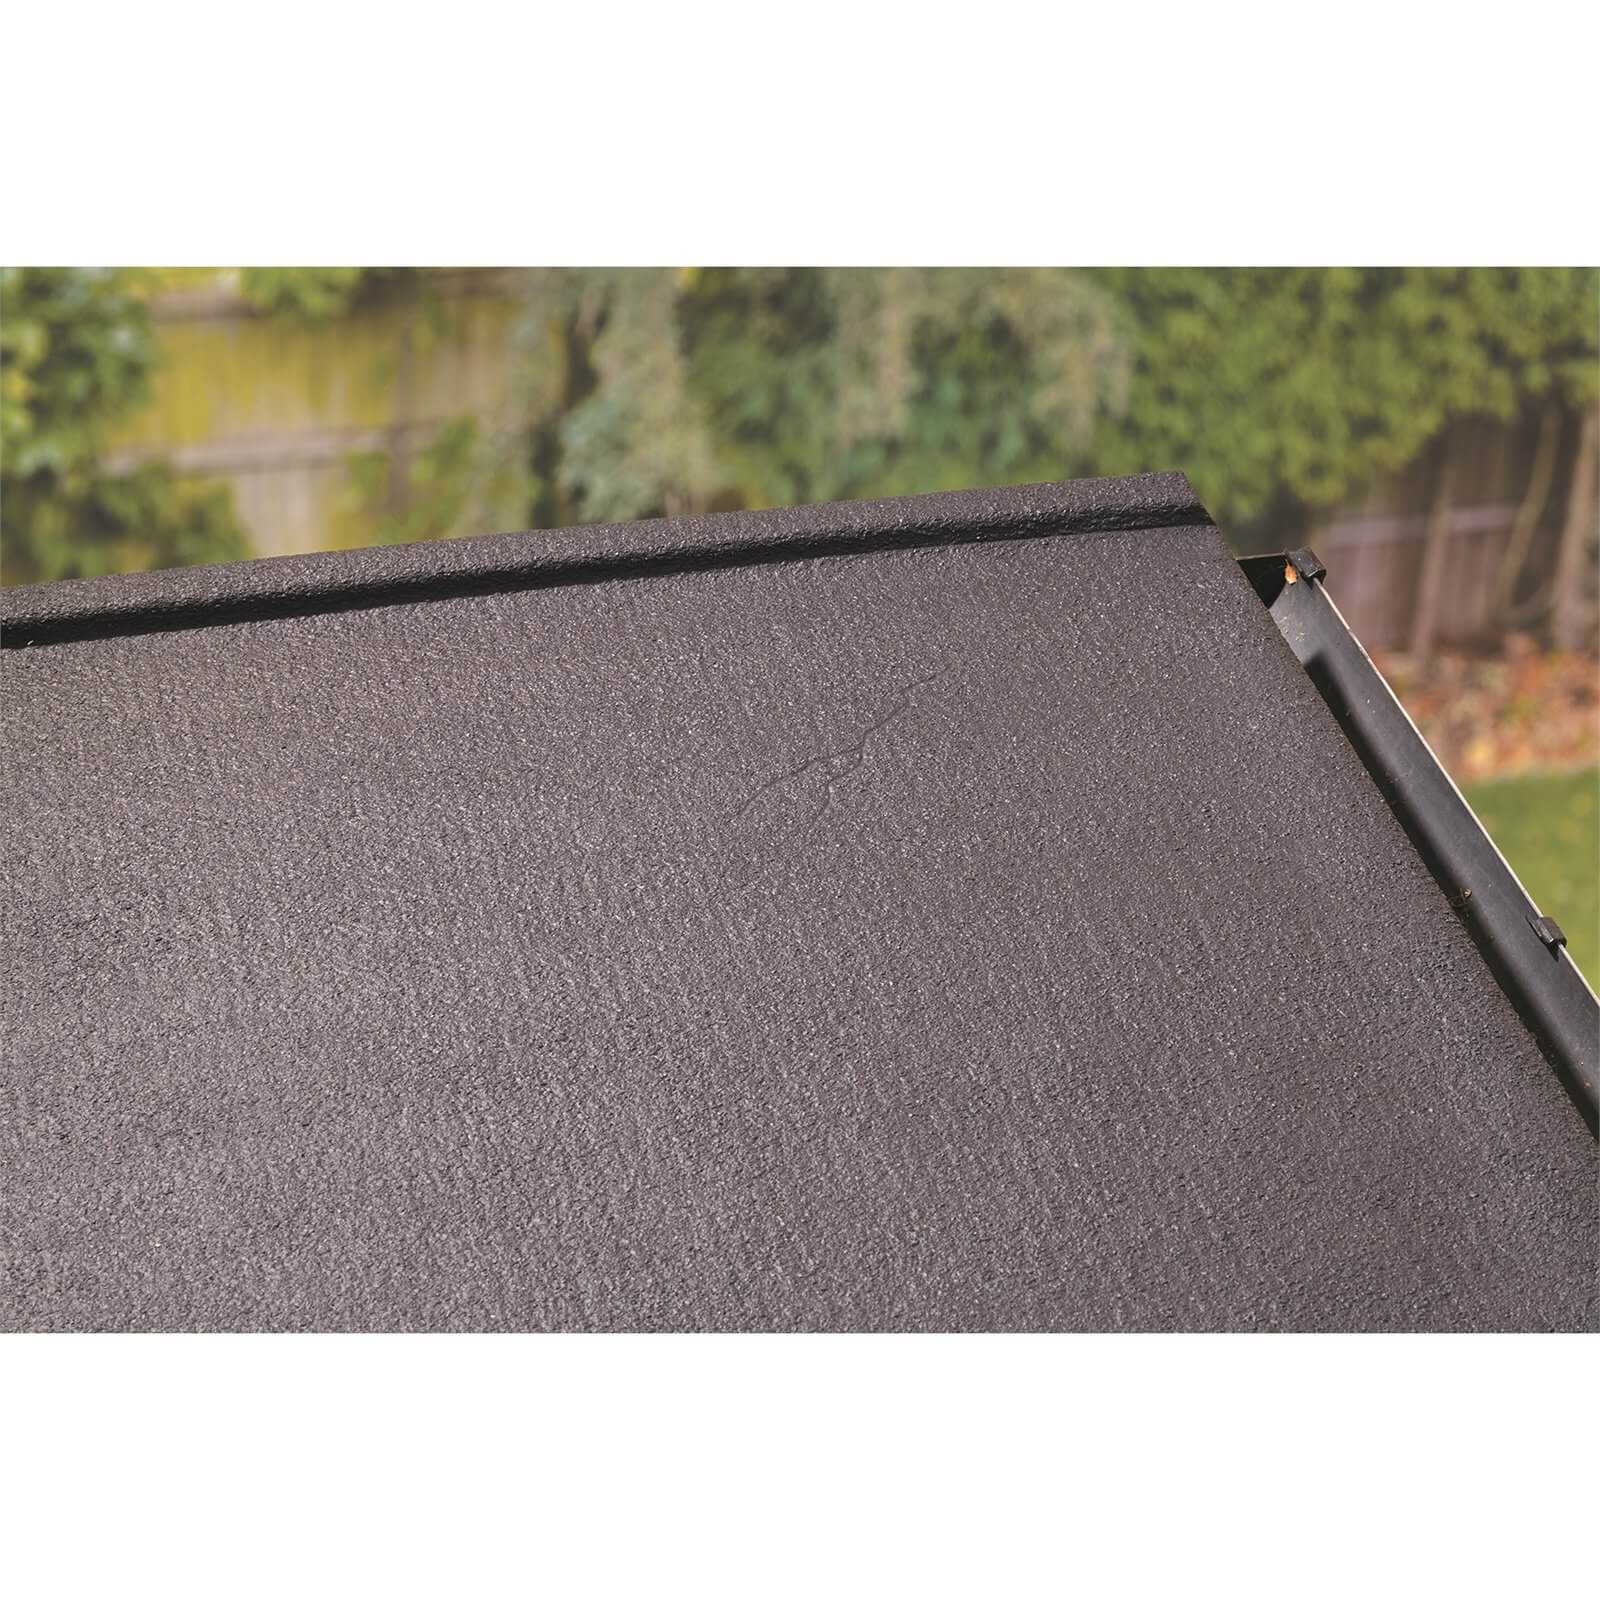 Thompson's 10 Year Roof Seal - Black - 2.5L